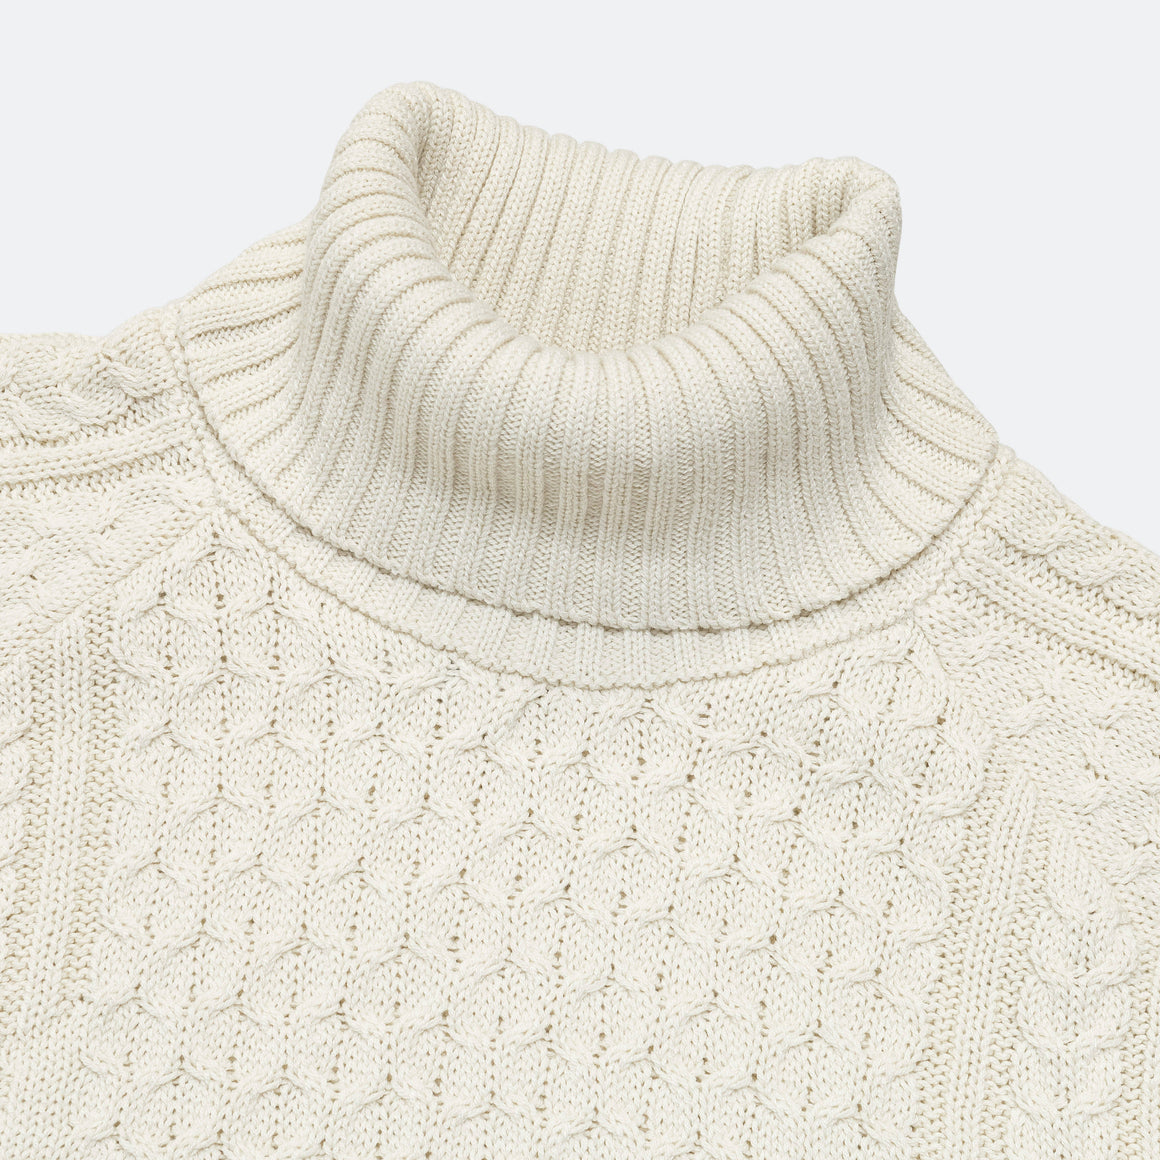 Nike - NikeLab Cable Knit Turtleneck Sweater - Light Bone - UP THERE